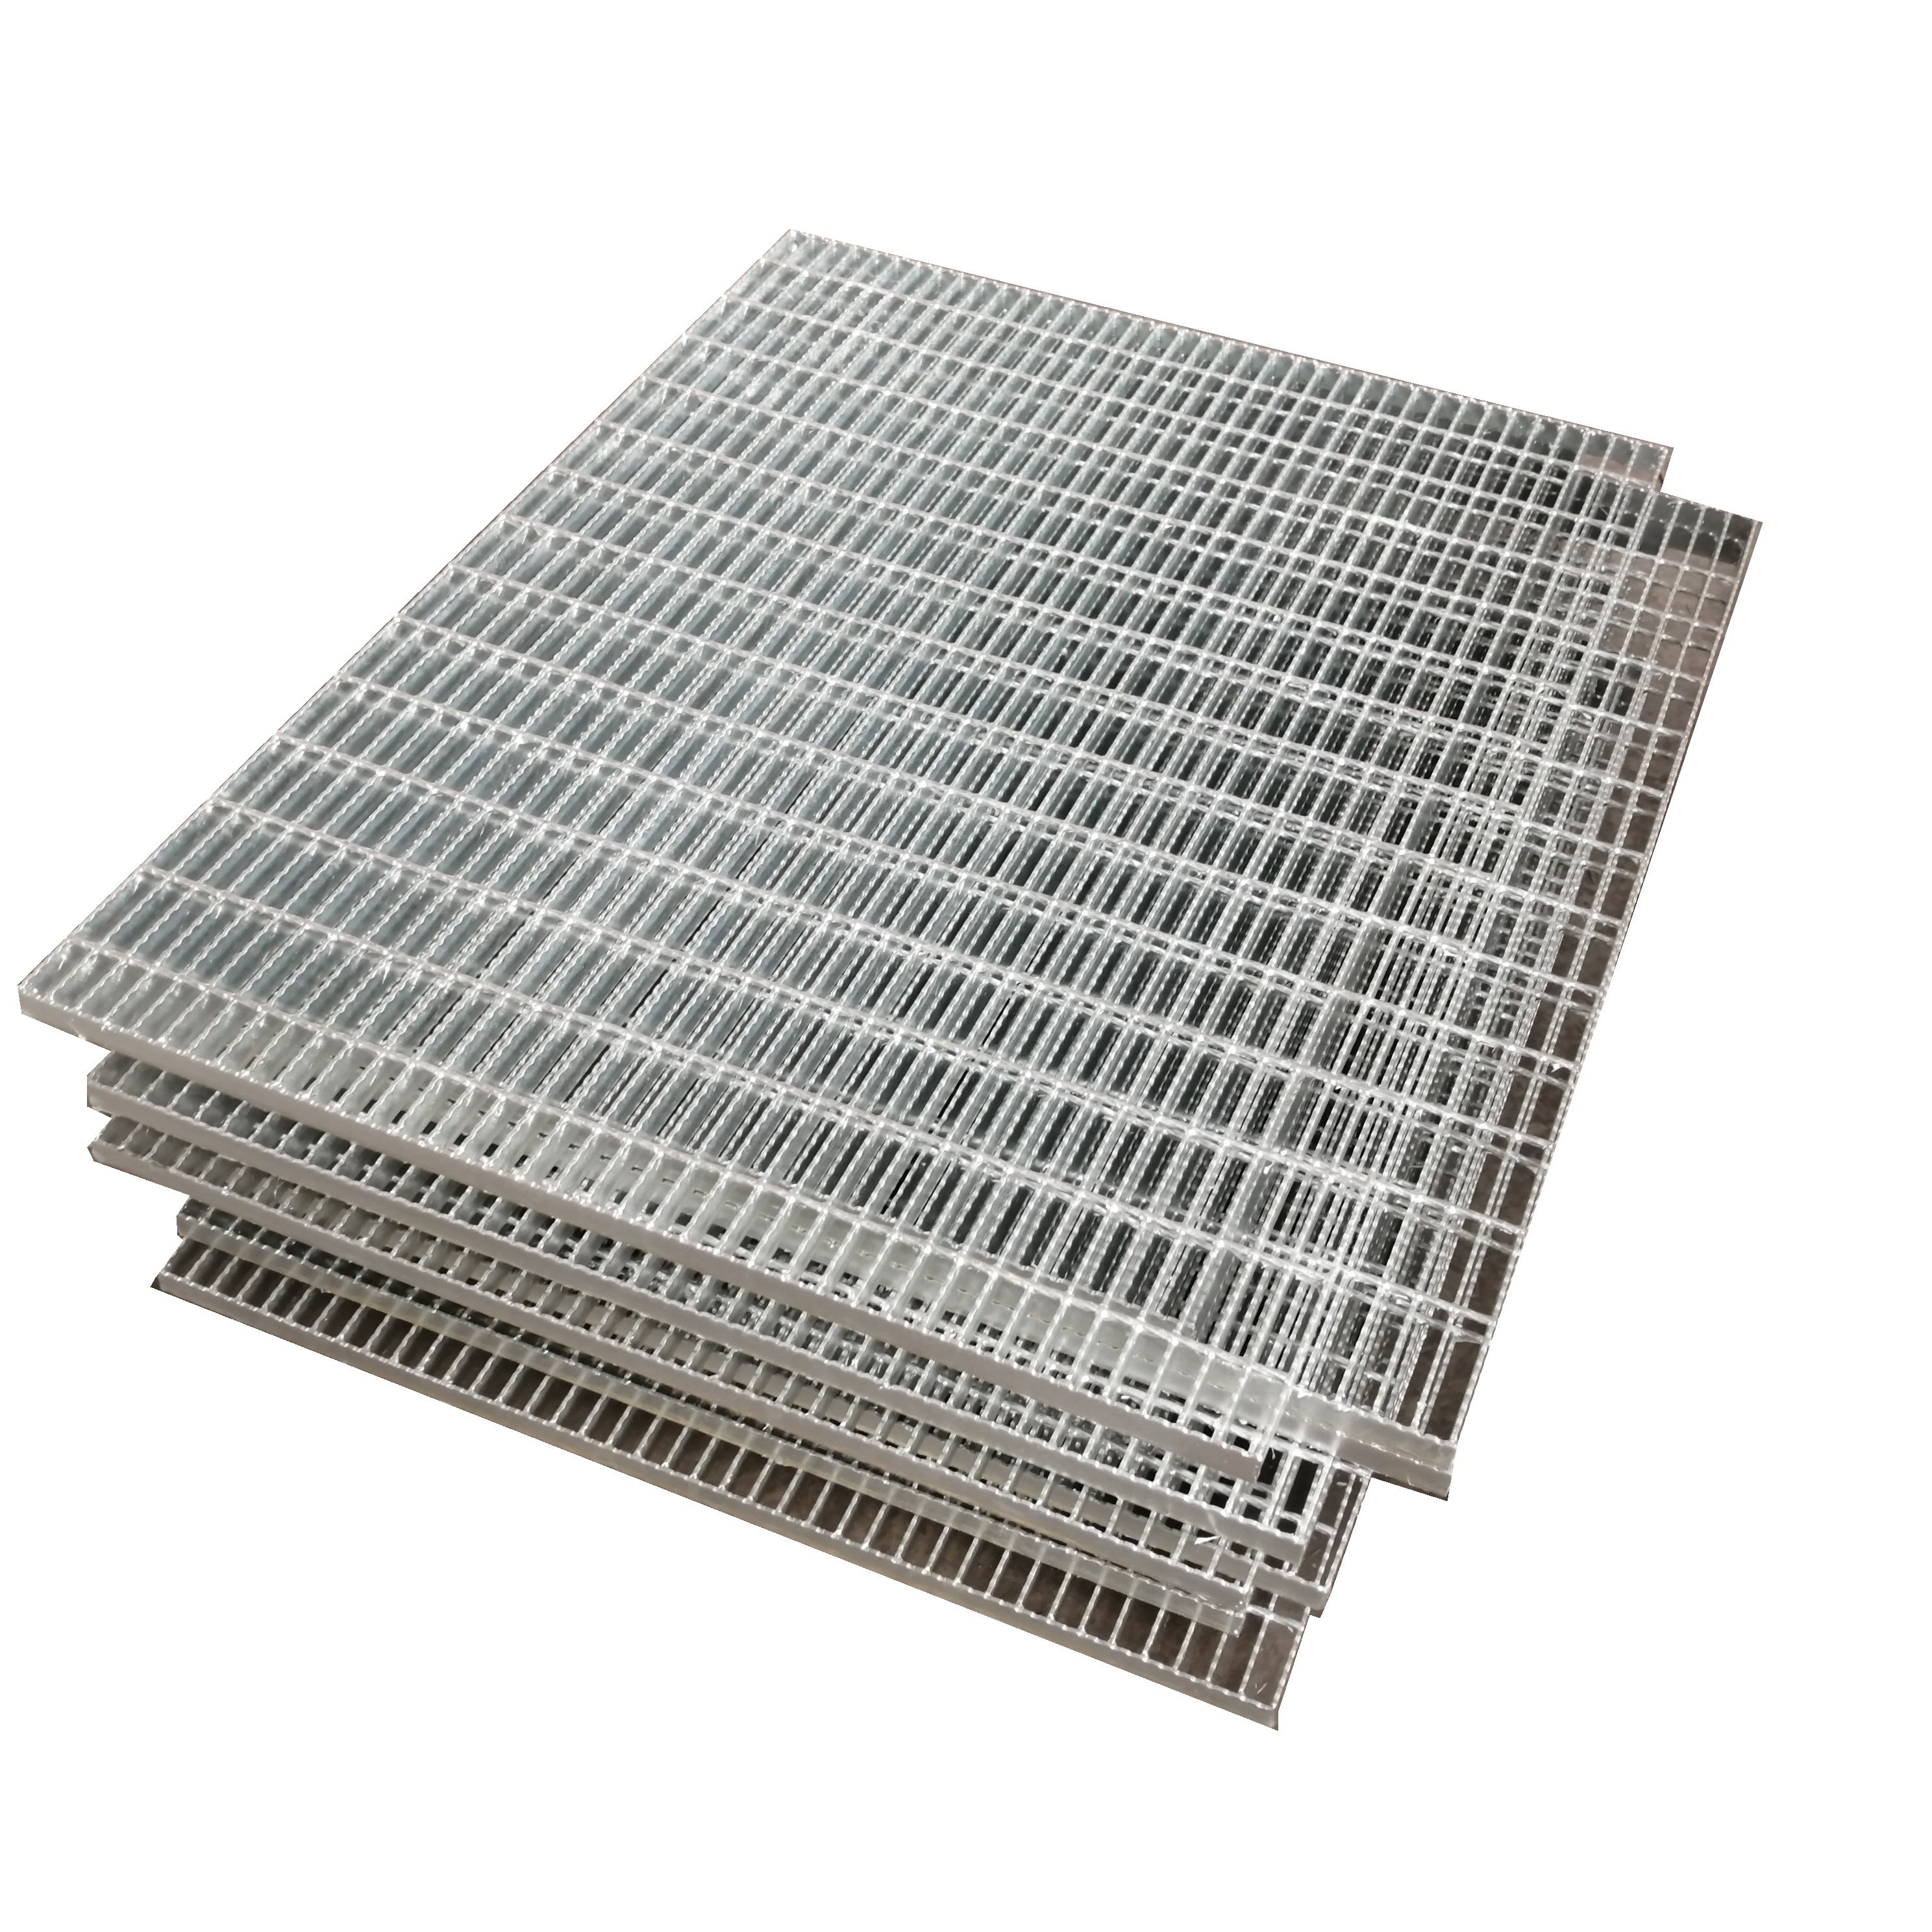 30×30 30x3mm Ss Trench Grating Metal Plates For Driveways